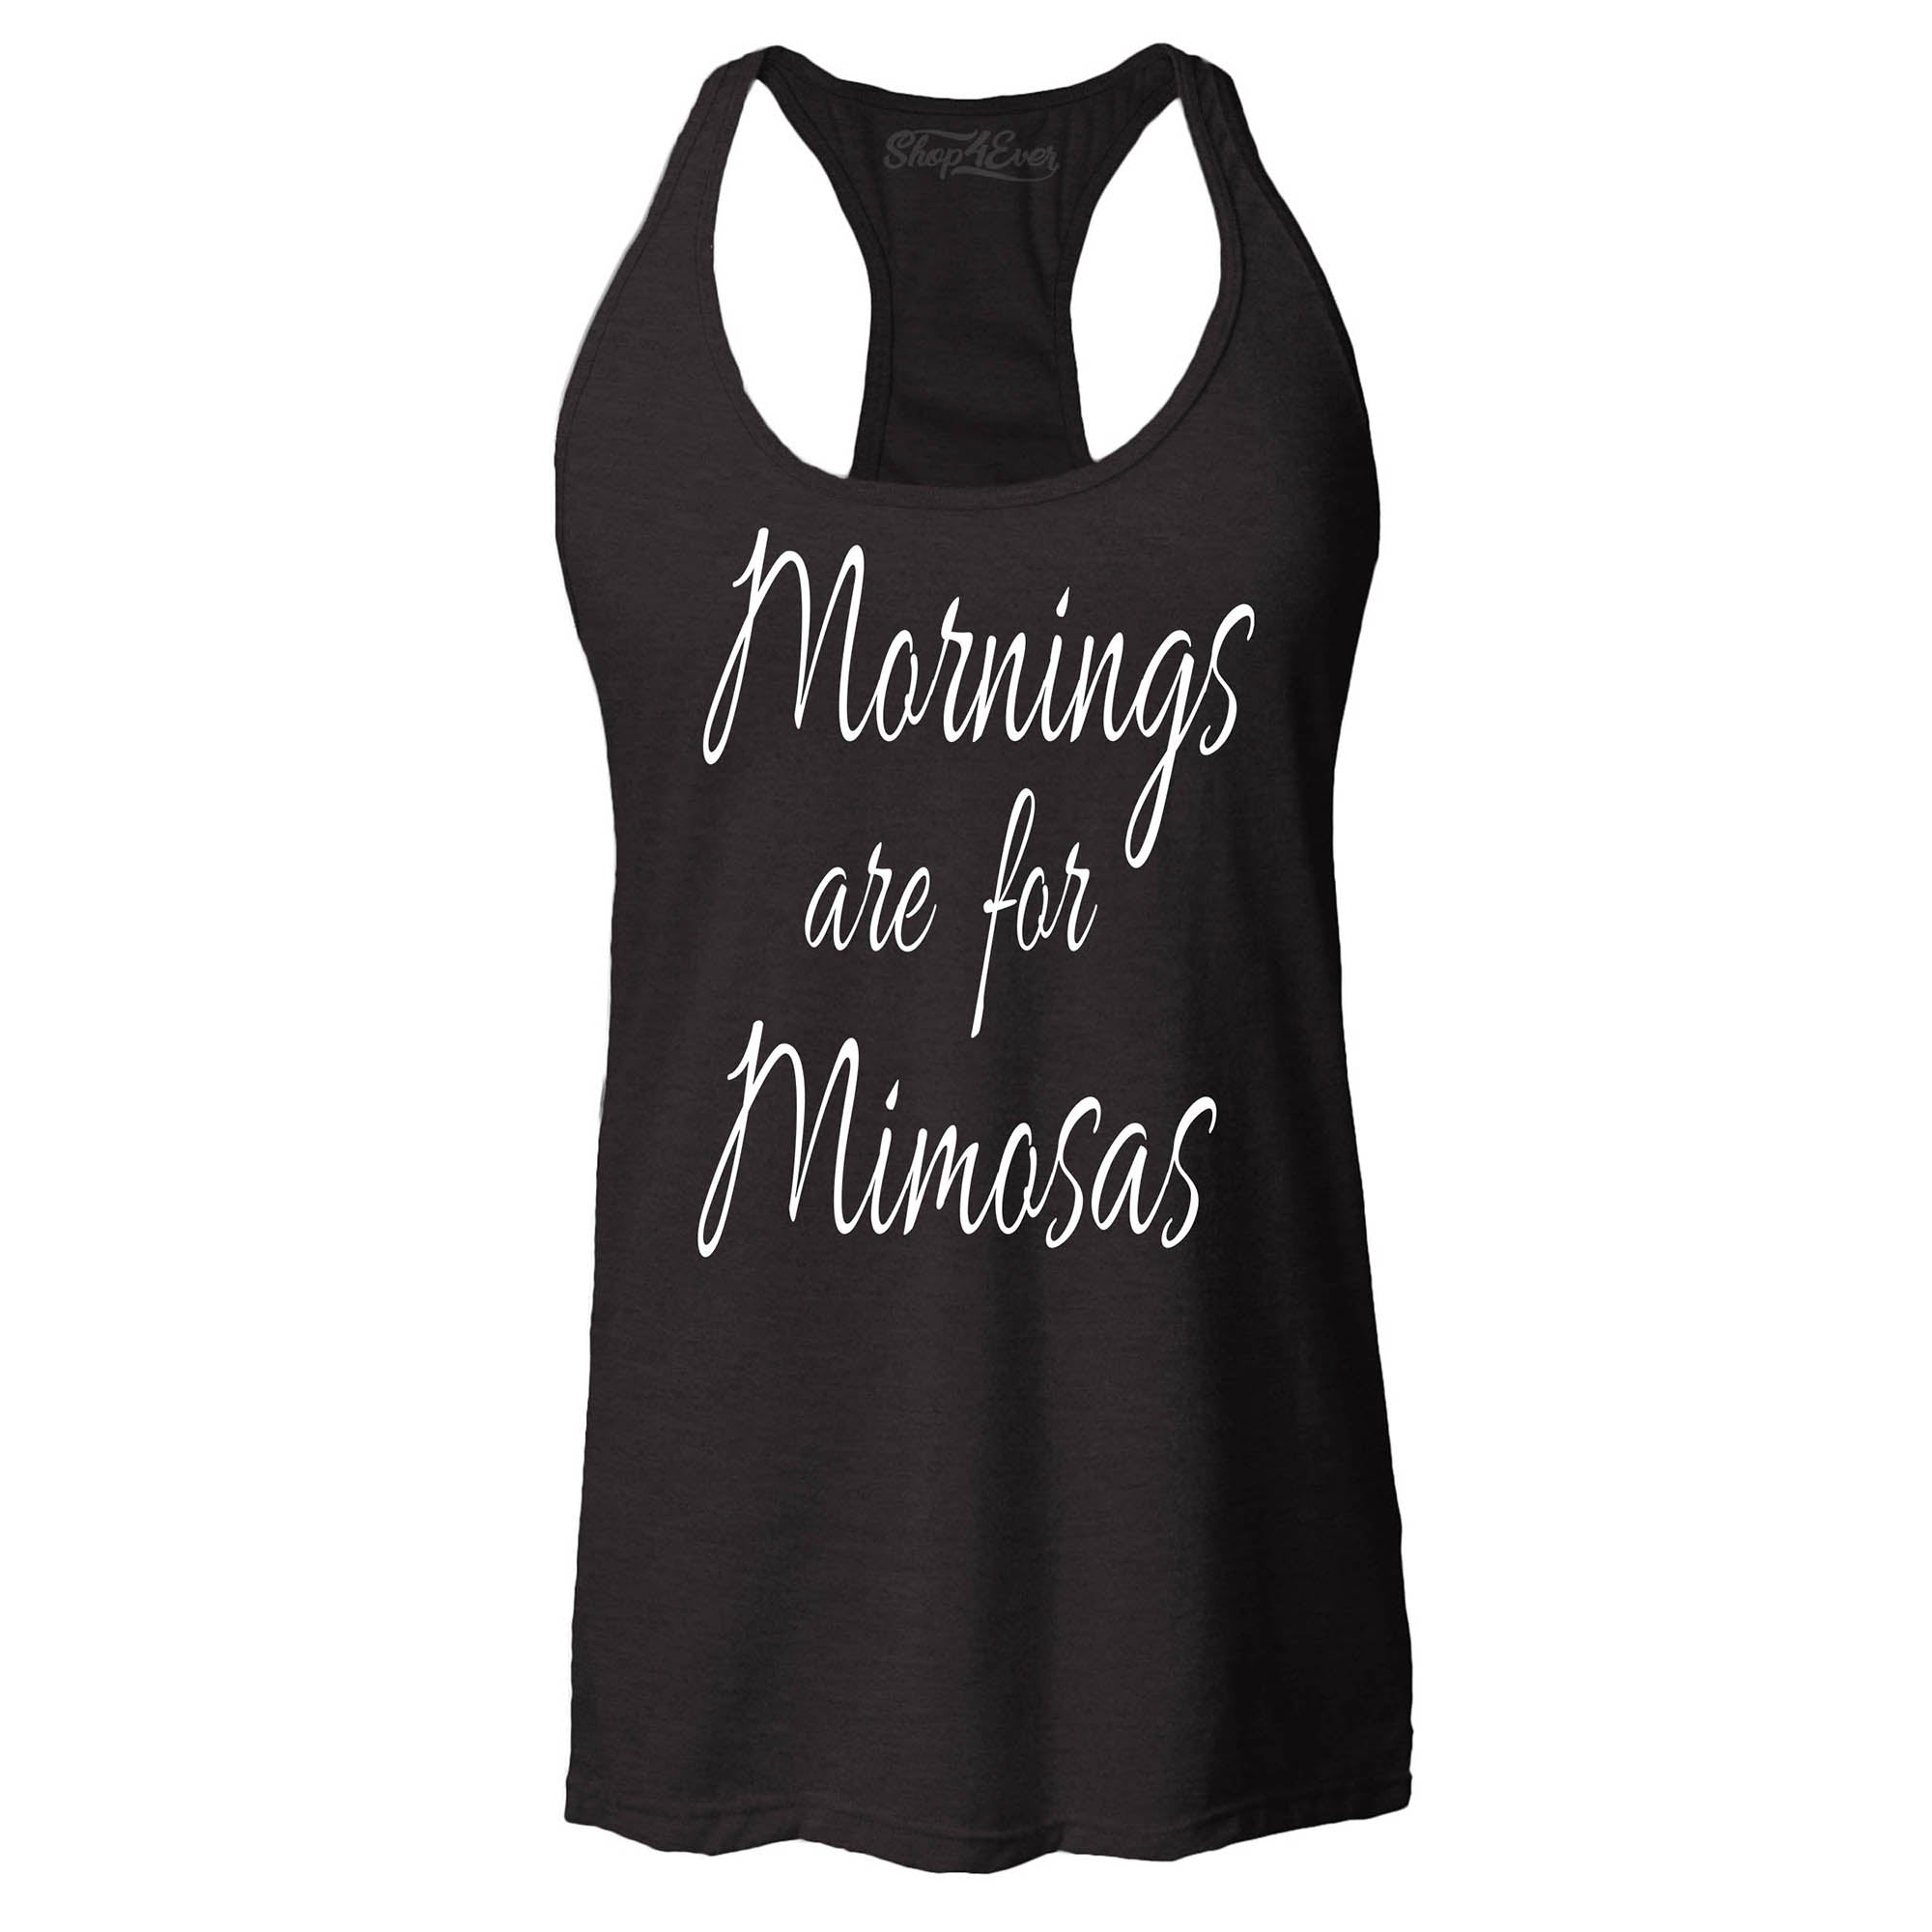 Mornings are for Mimosas Women's Racerback Drinking Tank Tops Slim FIT